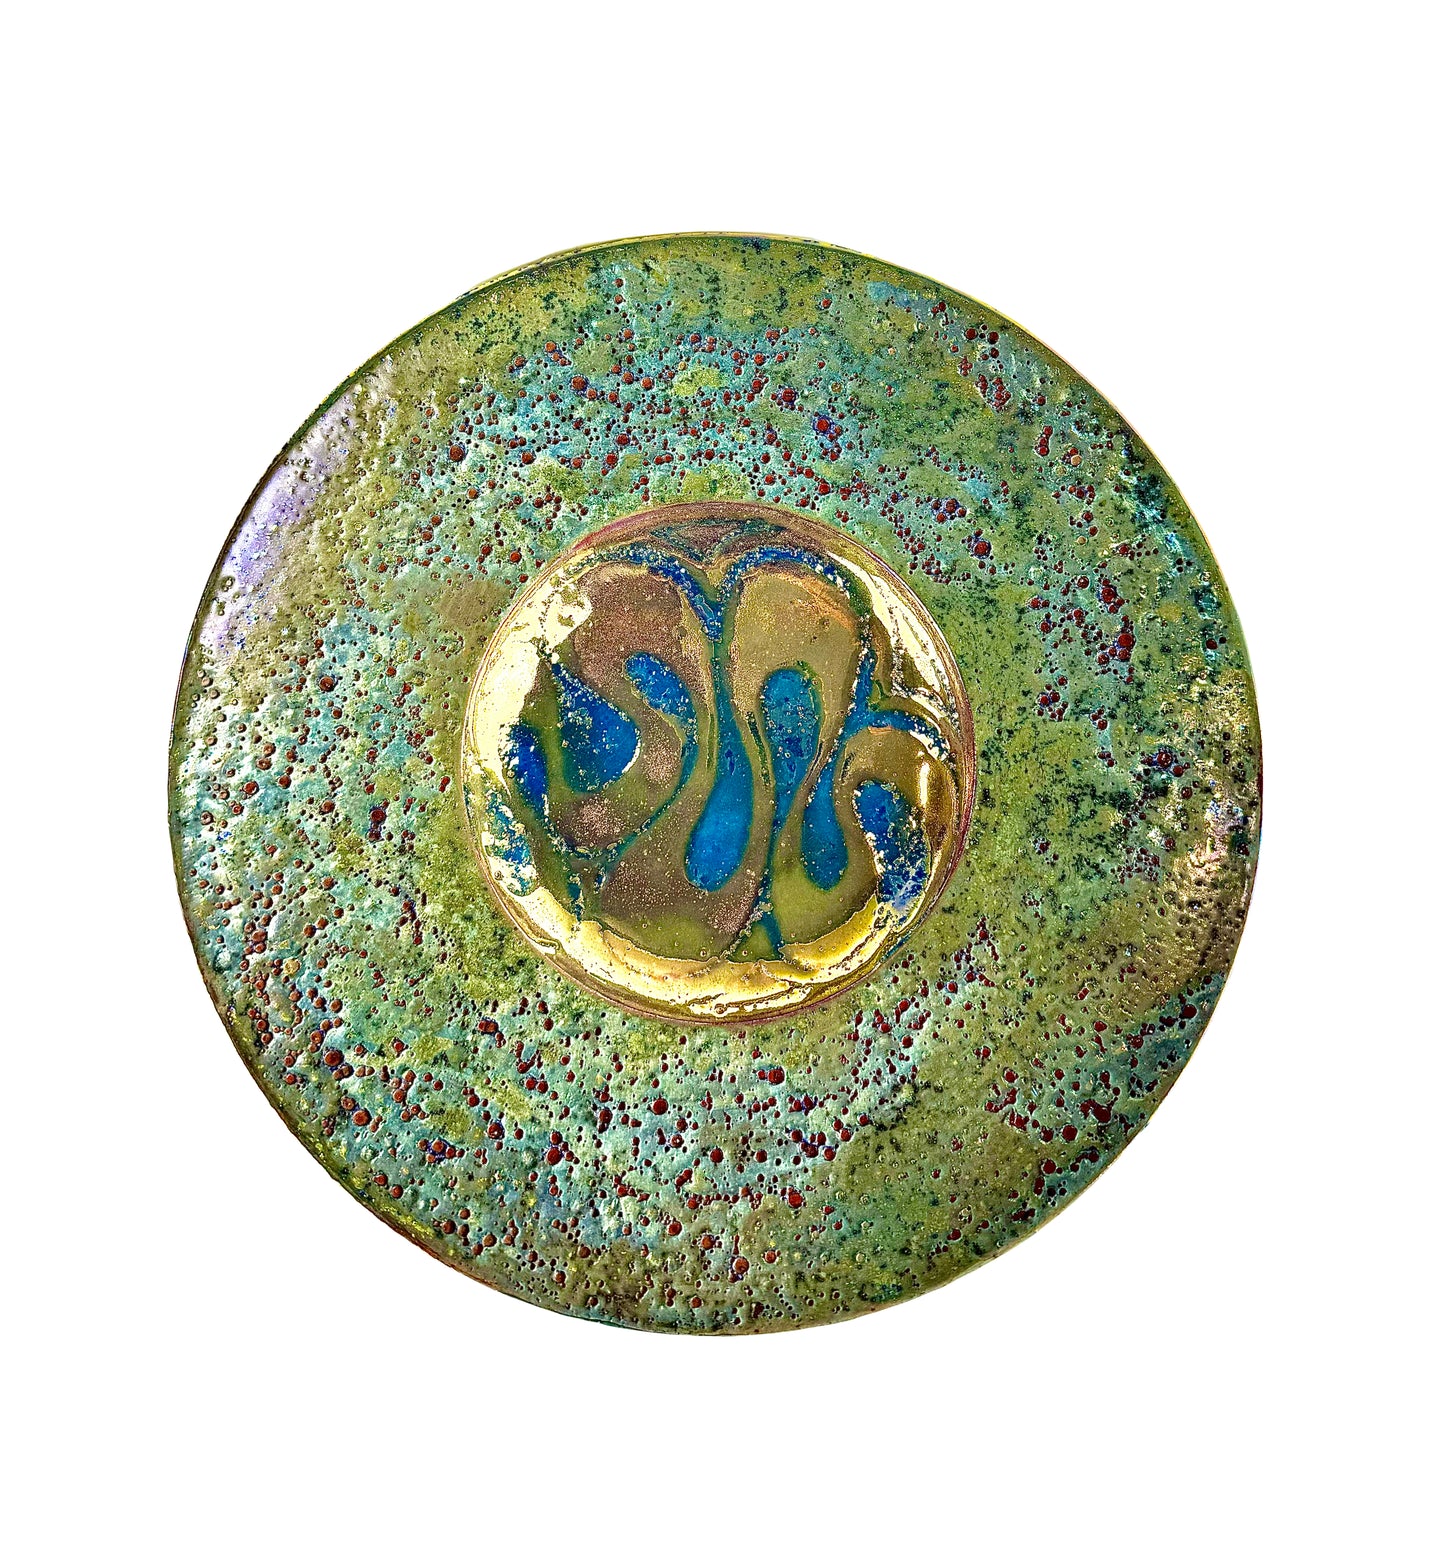 Blue and Gold Luster Swirl Bowl with Blue Exfoliated Crater Glaze Rim